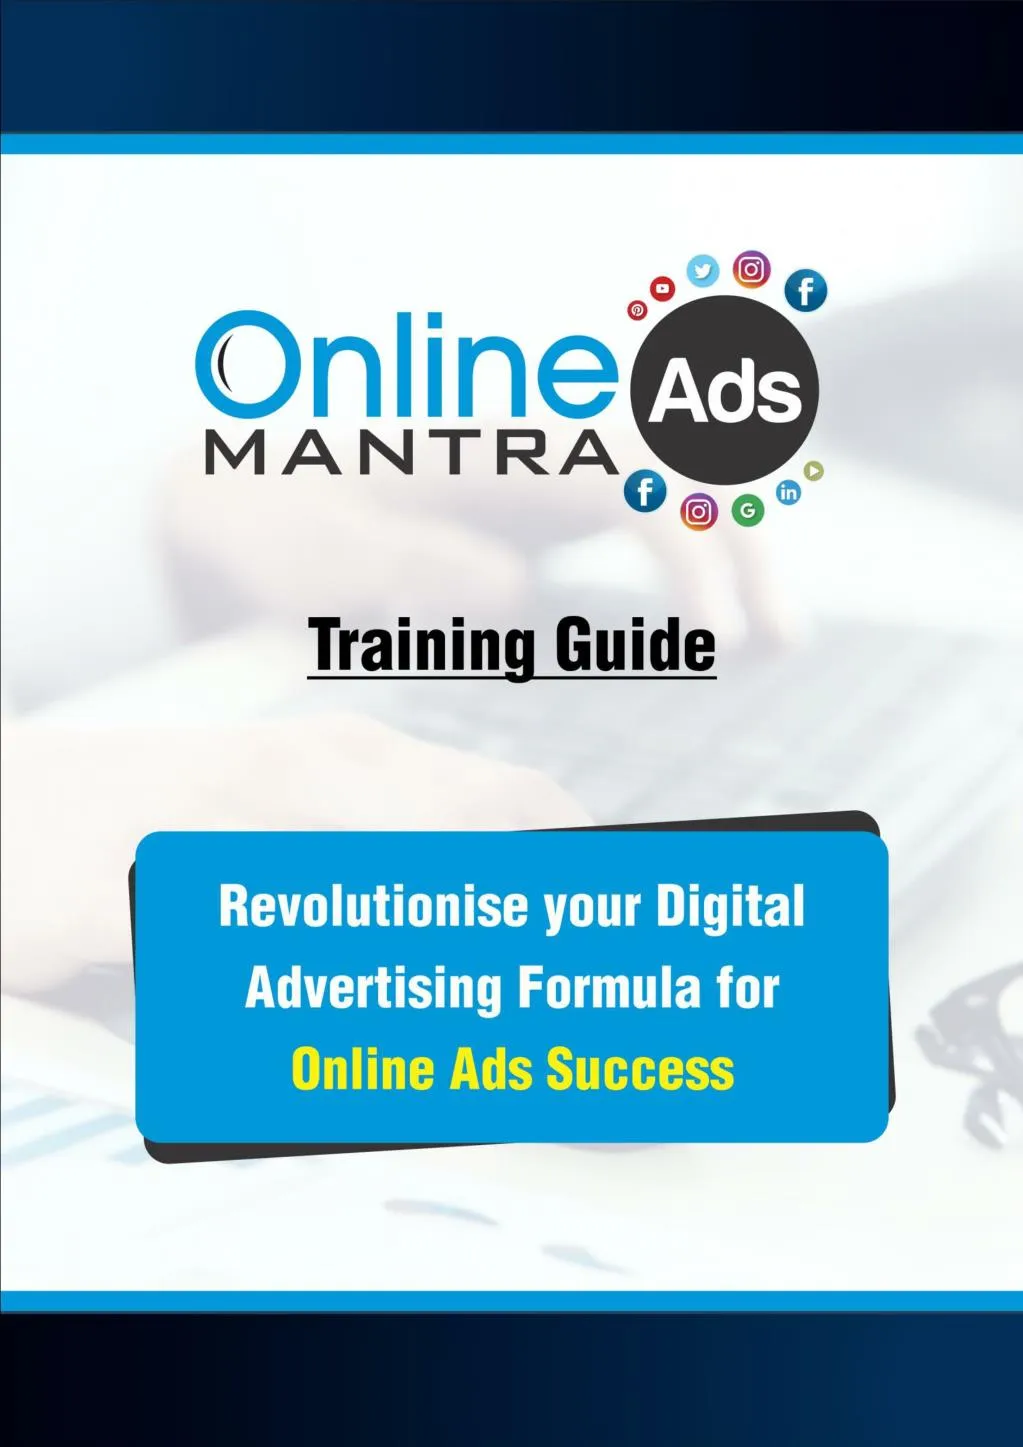 click here to download online ads mantra video